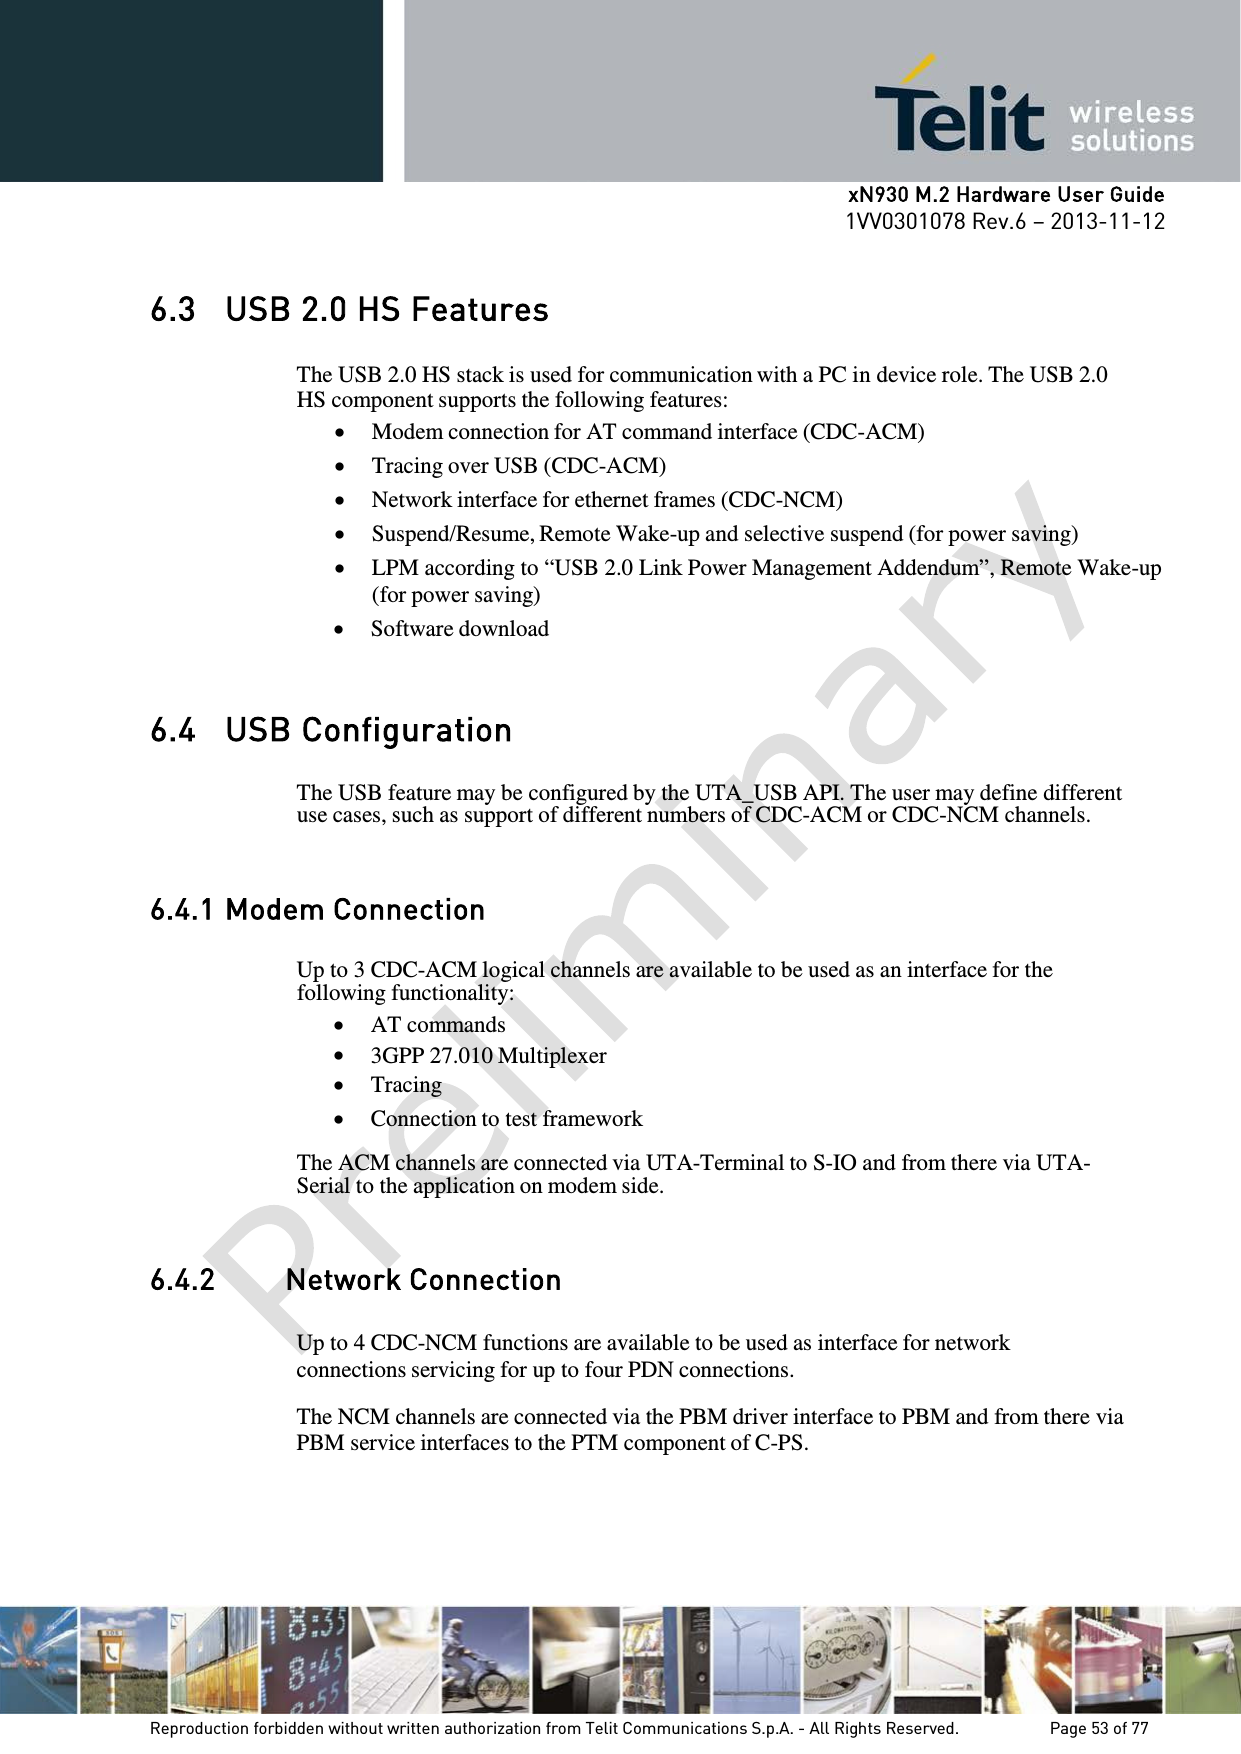      xN930 M.2 Hardware User Guide 1VV0301078 Rev.6 – 2013-11-12    6.3 USB 2.0 HS Features  The USB 2.0 HS stack is used for communication with a PC in device role. The USB 2.0 HS component supports the following features: • Modem connection for AT command interface (CDC-ACM) • Tracing over USB (CDC-ACM) • Network interface for ethernet frames (CDC-NCM) • Suspend/Resume, Remote Wake-up and selective suspend (for power saving) • LPM according to “USB 2.0 Link Power Management Addendum”, Remote Wake-up (for power saving) • Software download   6.4 USB Configuration  The USB feature may be configured by the UTA_USB API. The user may define different use cases, such as support of different numbers of CDC-ACM or CDC-NCM channels.   6.4.1 Modem Connection  Up to 3 CDC-ACM logical channels are available to be used as an interface for the following functionality: • AT commands • 3GPP 27.010 Multiplexer • Tracing • Connection to test framework  The ACM channels are connected via UTA-Terminal to S-IO and from there via UTA- Serial to the application on modem side.   6.4.2  Network Connection  Up to 4 CDC-NCM functions are available to be used as interface for network connections servicing for up to four PDN connections.  The NCM channels are connected via the PBM driver interface to PBM and from there via PBM service interfaces to the PTM component of C-PS.     Reproduction forbidden without written authorization from Telit Communications S.p.A. - All Rights Reserved.    Page 53 of 77 